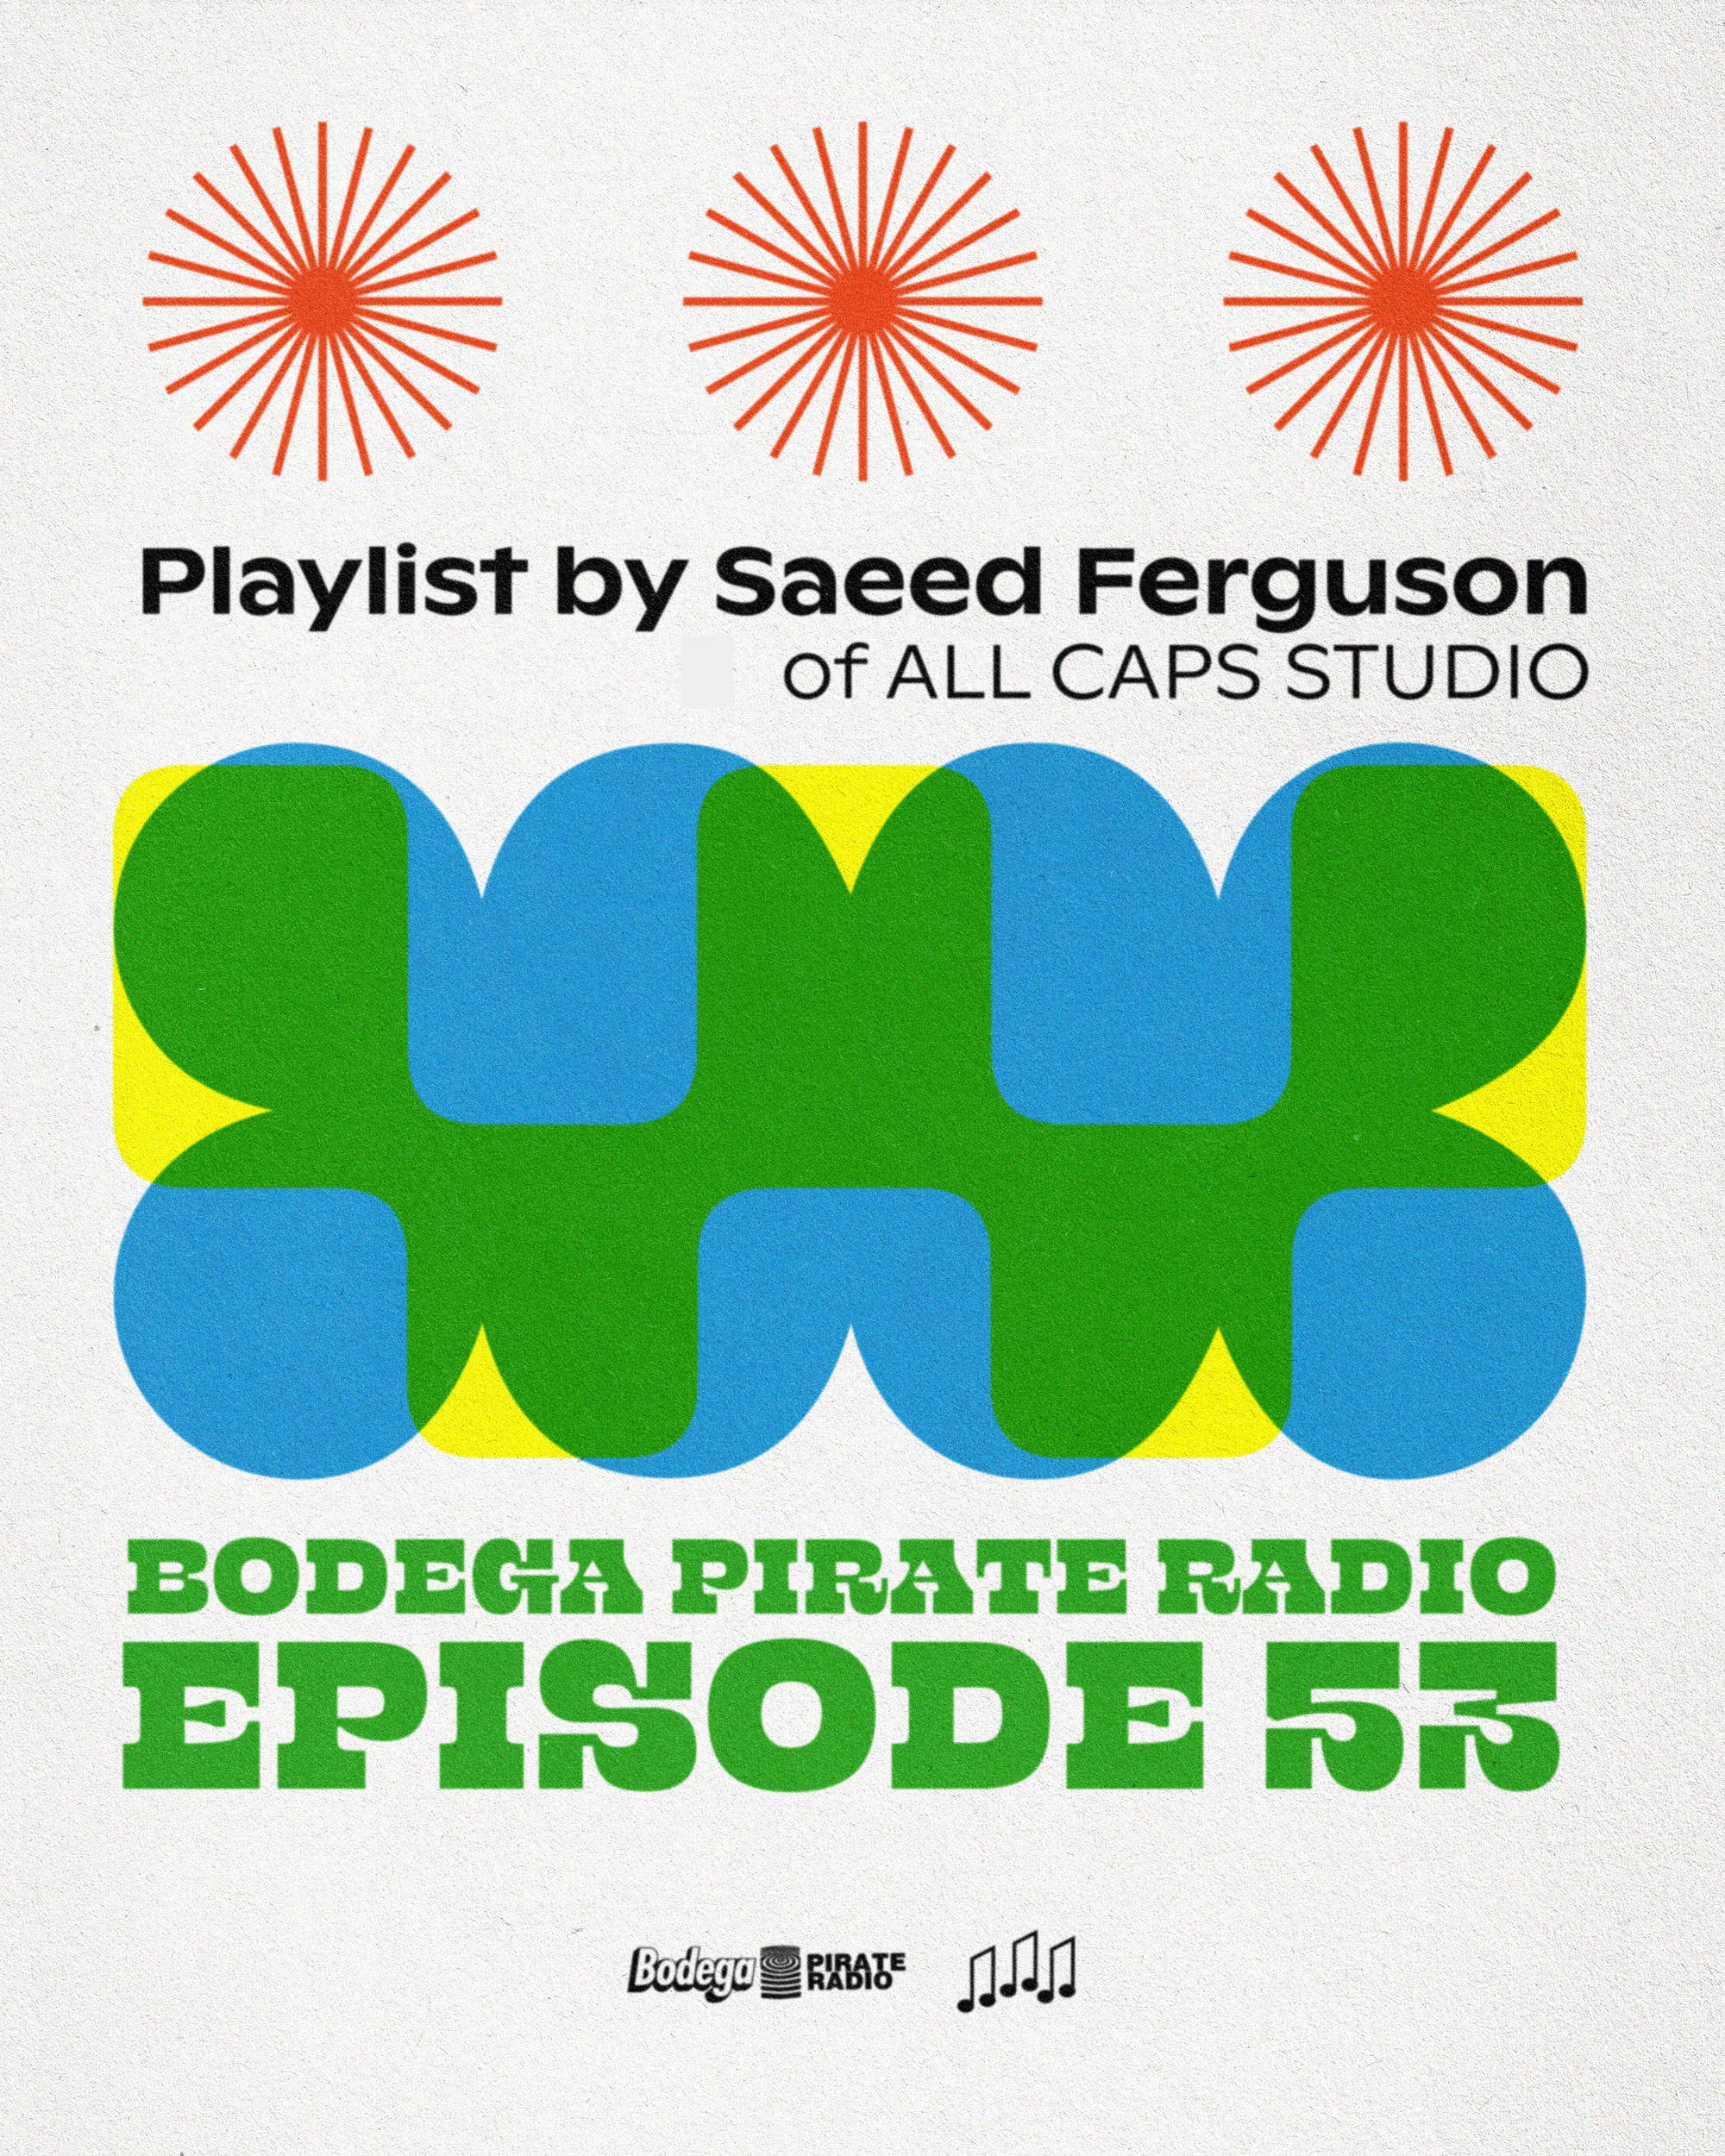 EPISODE #53: EXCLUSIVE PLAYLIST BY SAEED FERGUSON